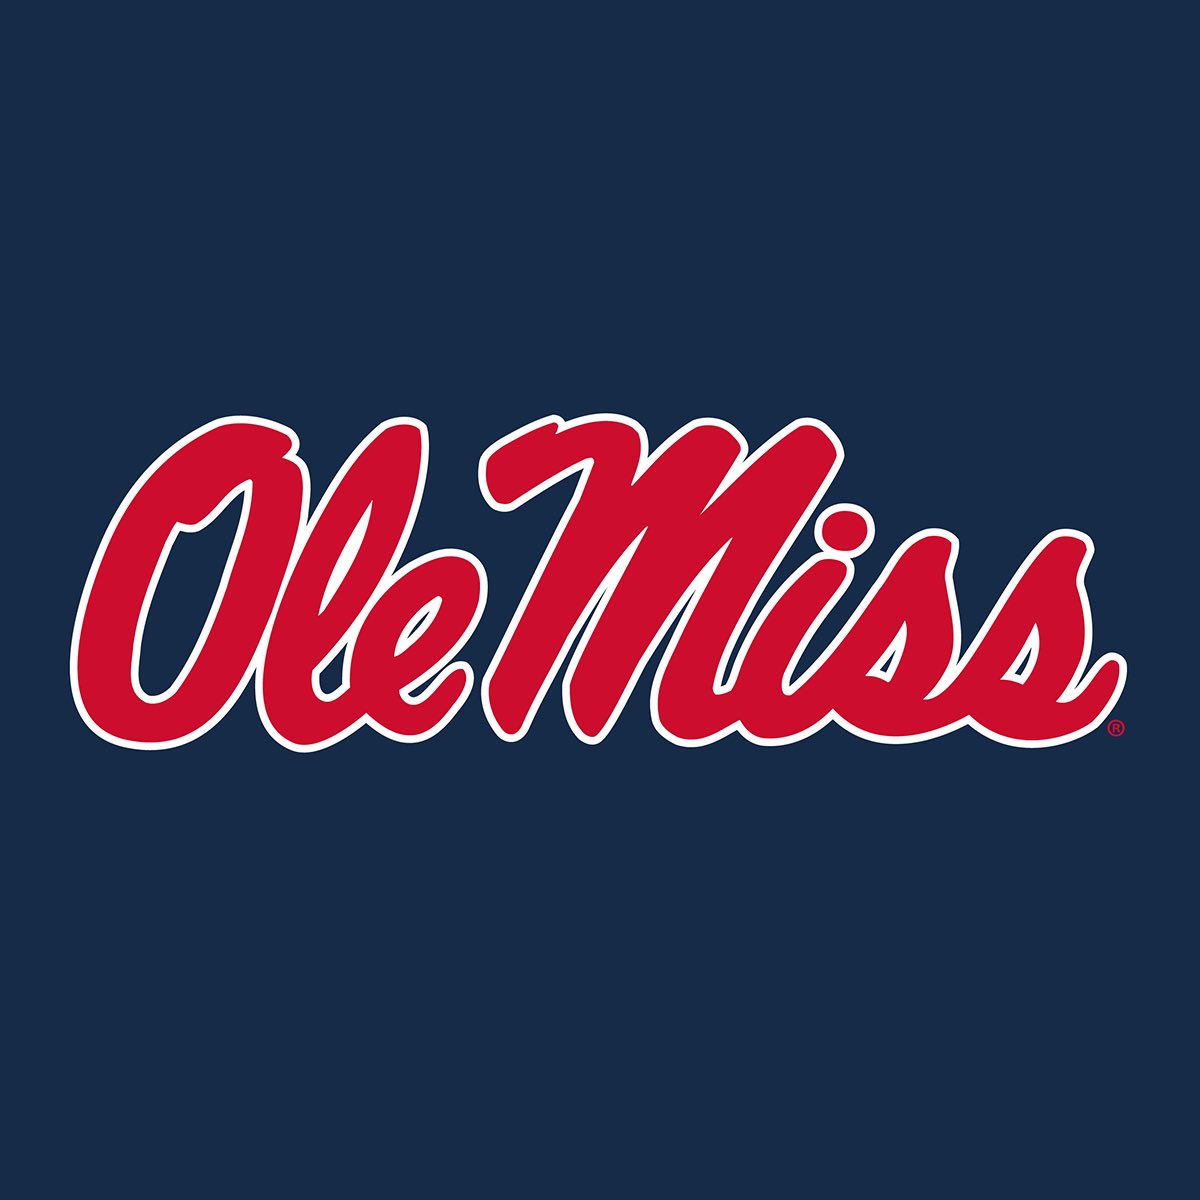 #AGTG Thanks to @CoachB_BROWN for visiting and I’m blessed to receive an offer from Ole Miss! 🔵🔴 @CoachJensen3 @rashadbobino44 @DonnieBaggs_